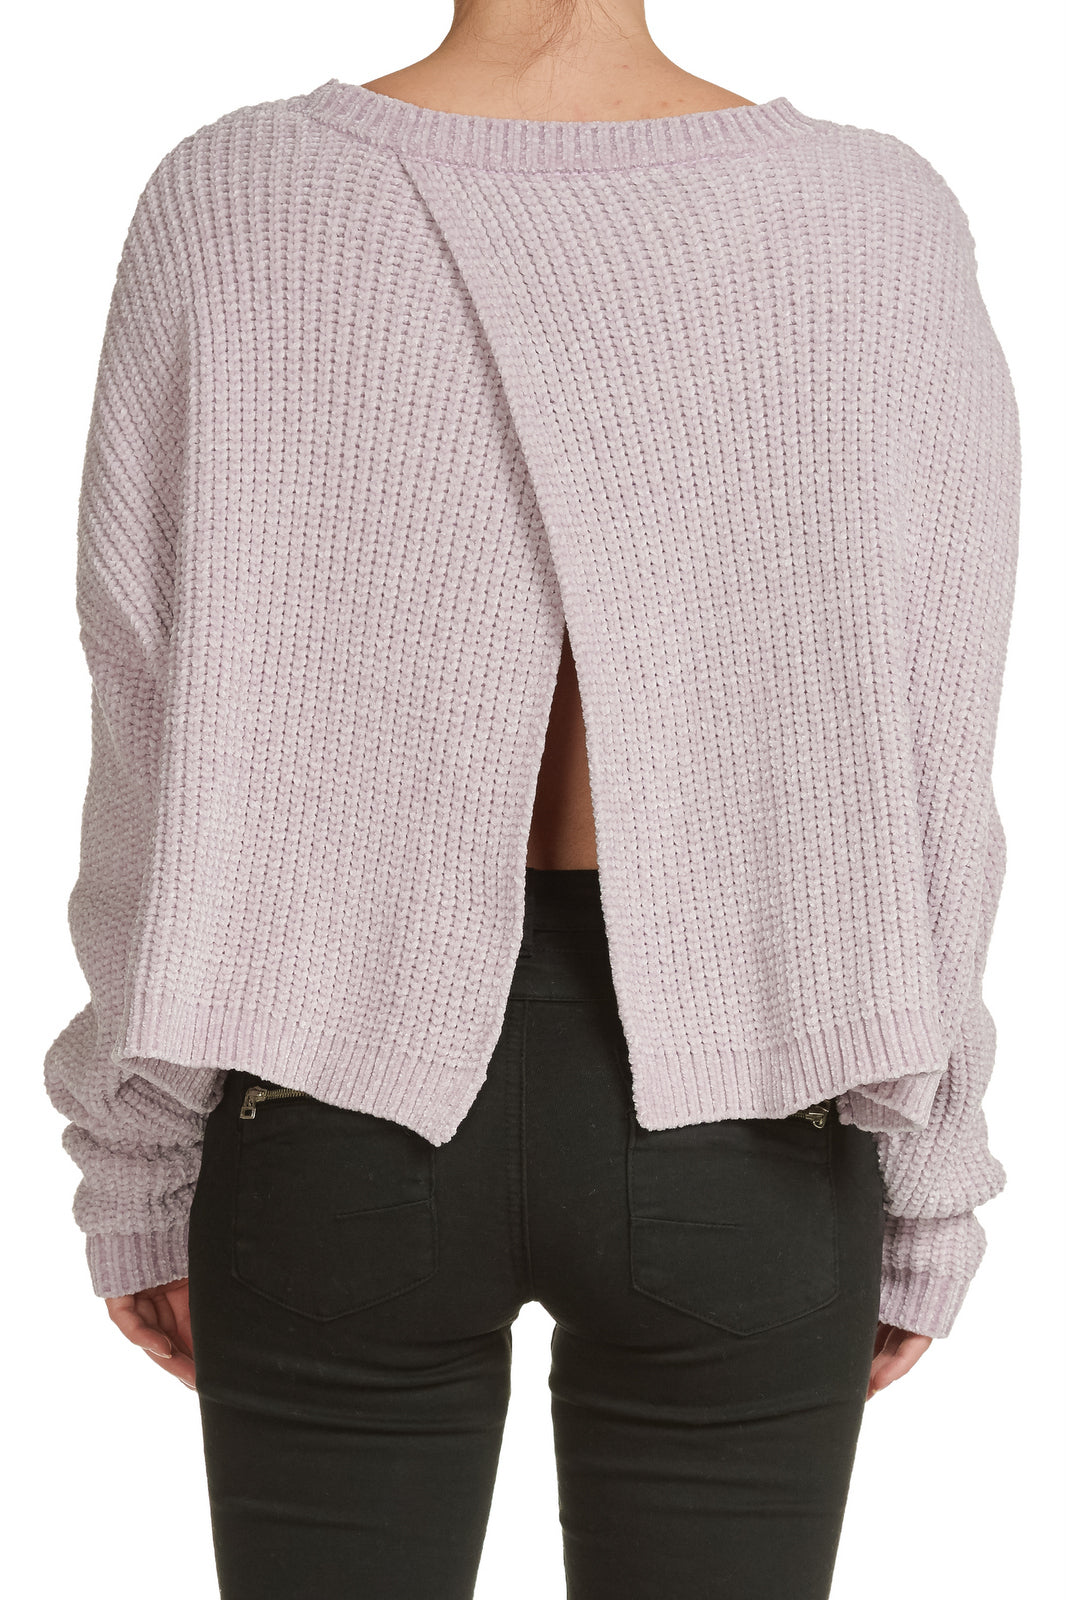 Lavender Crew Neck Sweater with Crossback